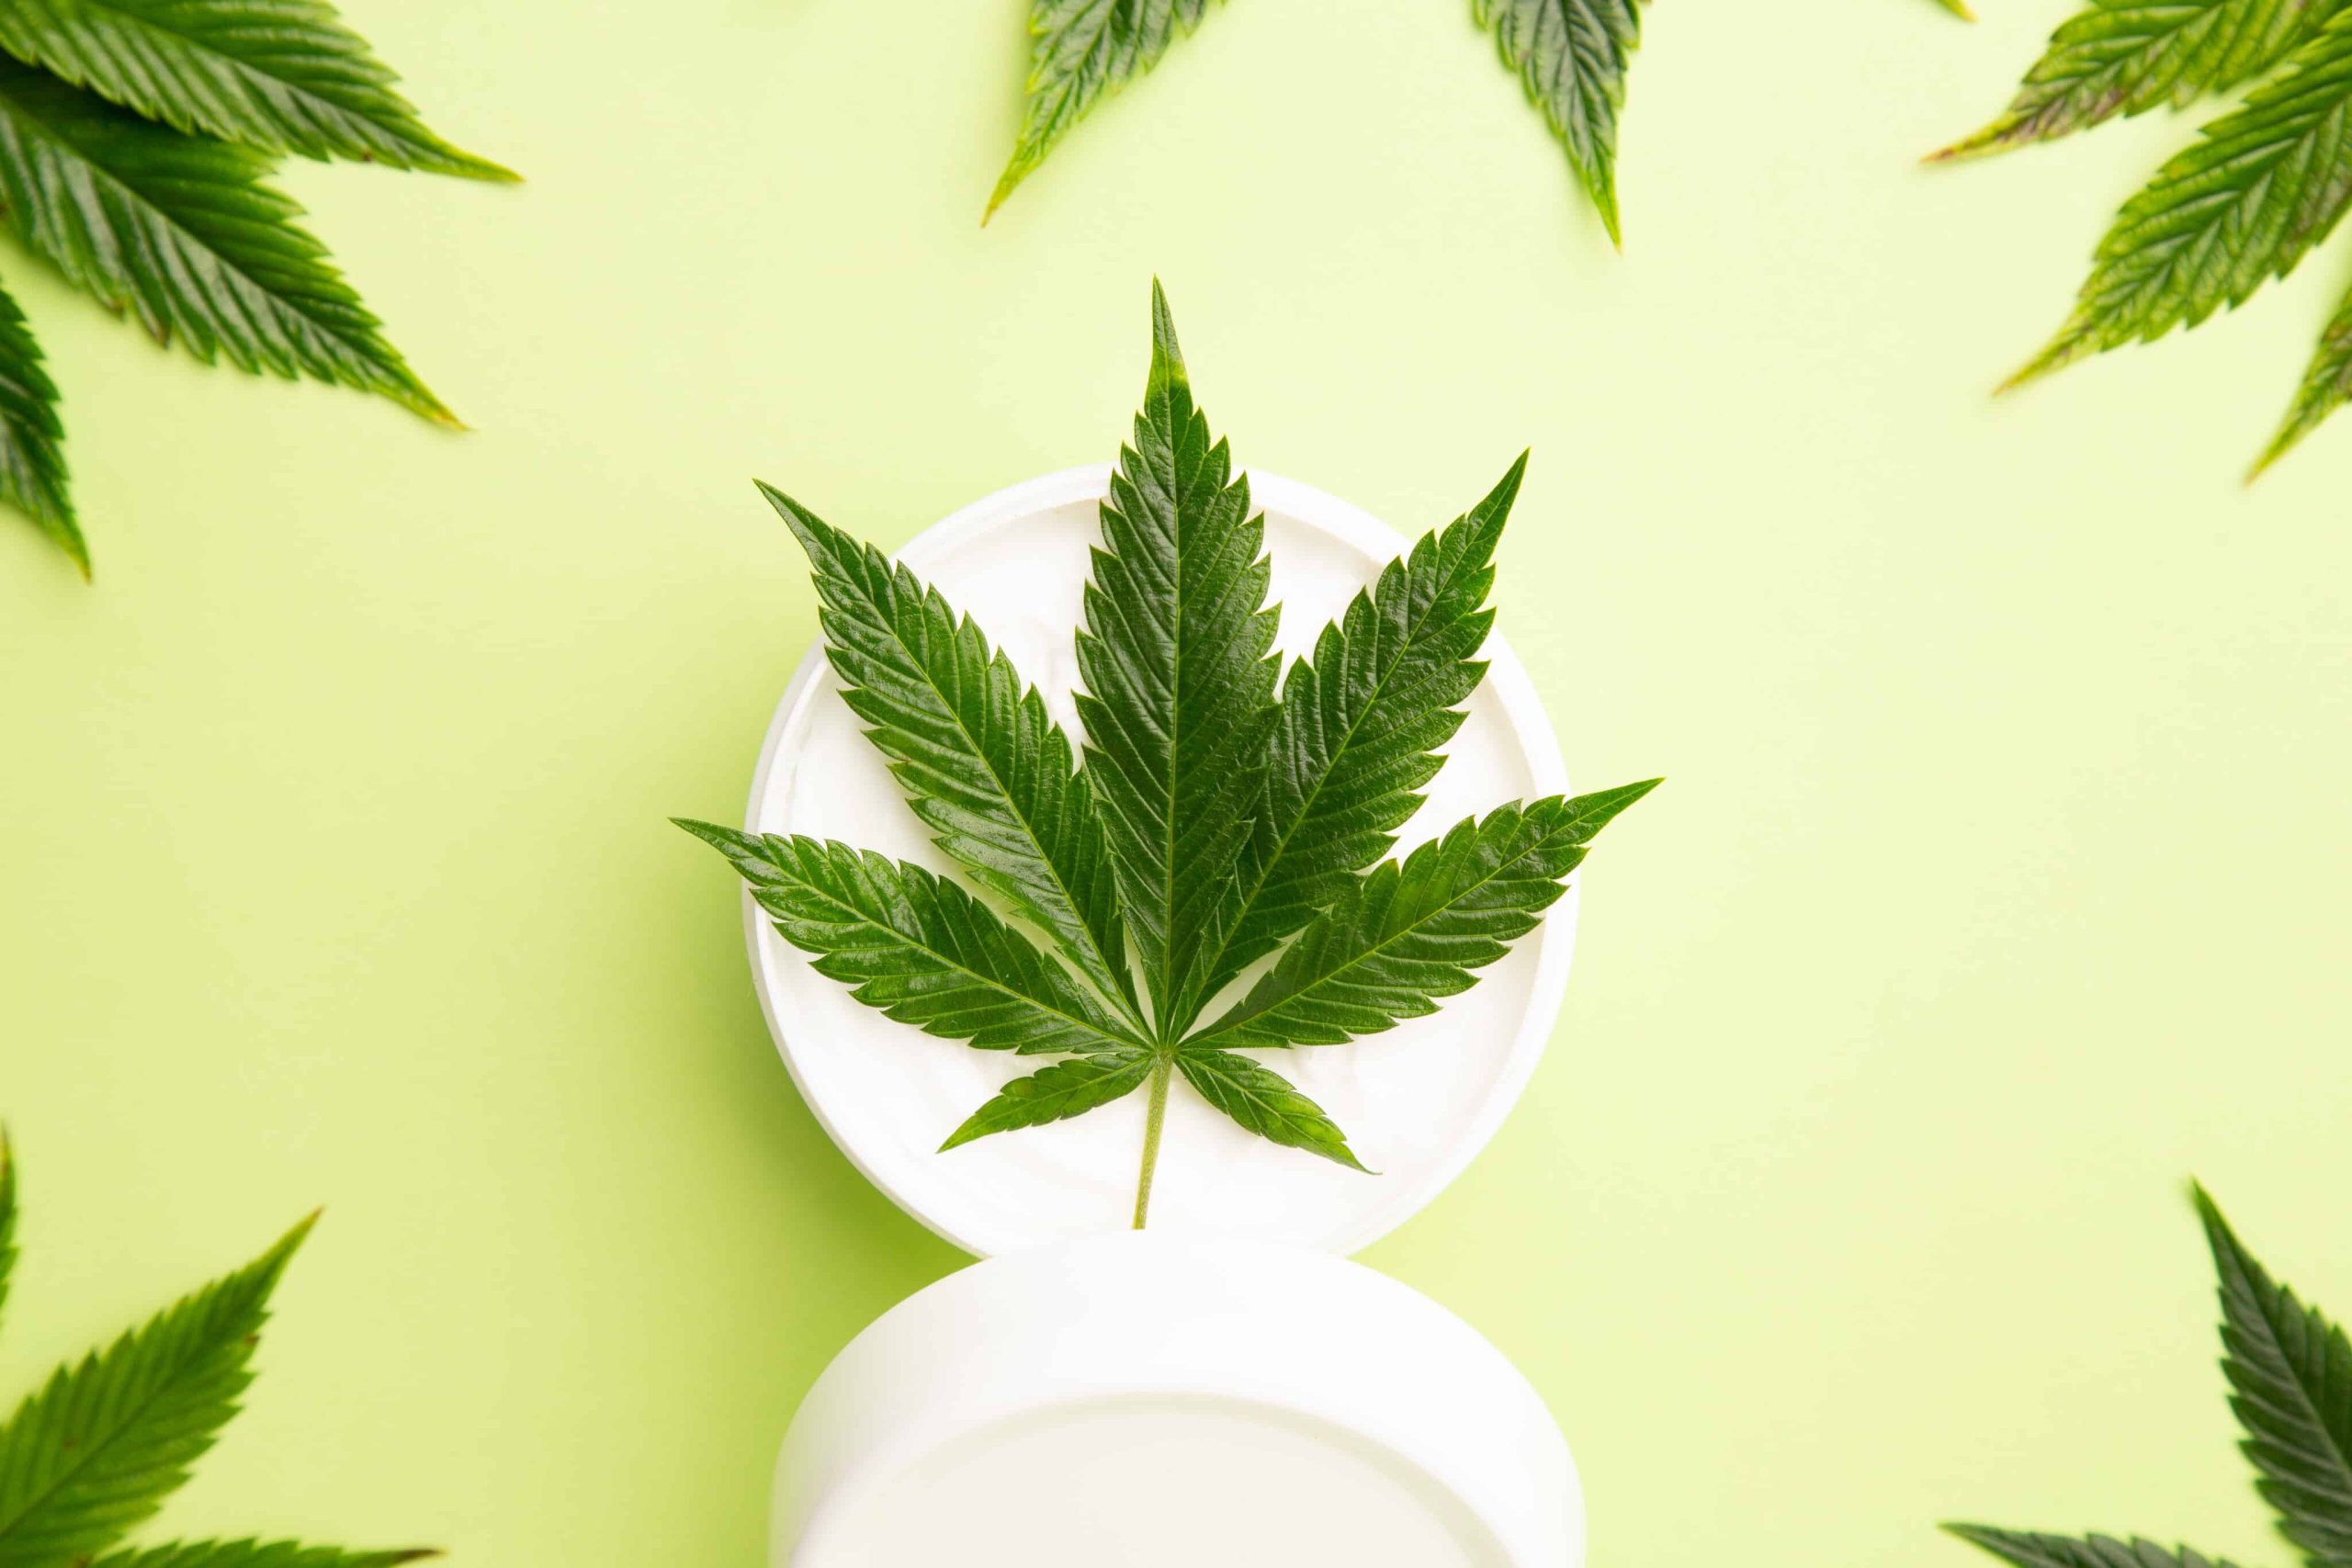 A Balm For Baldness? Study Finds Hemp Topical Solutions May Trigger Hair Growth